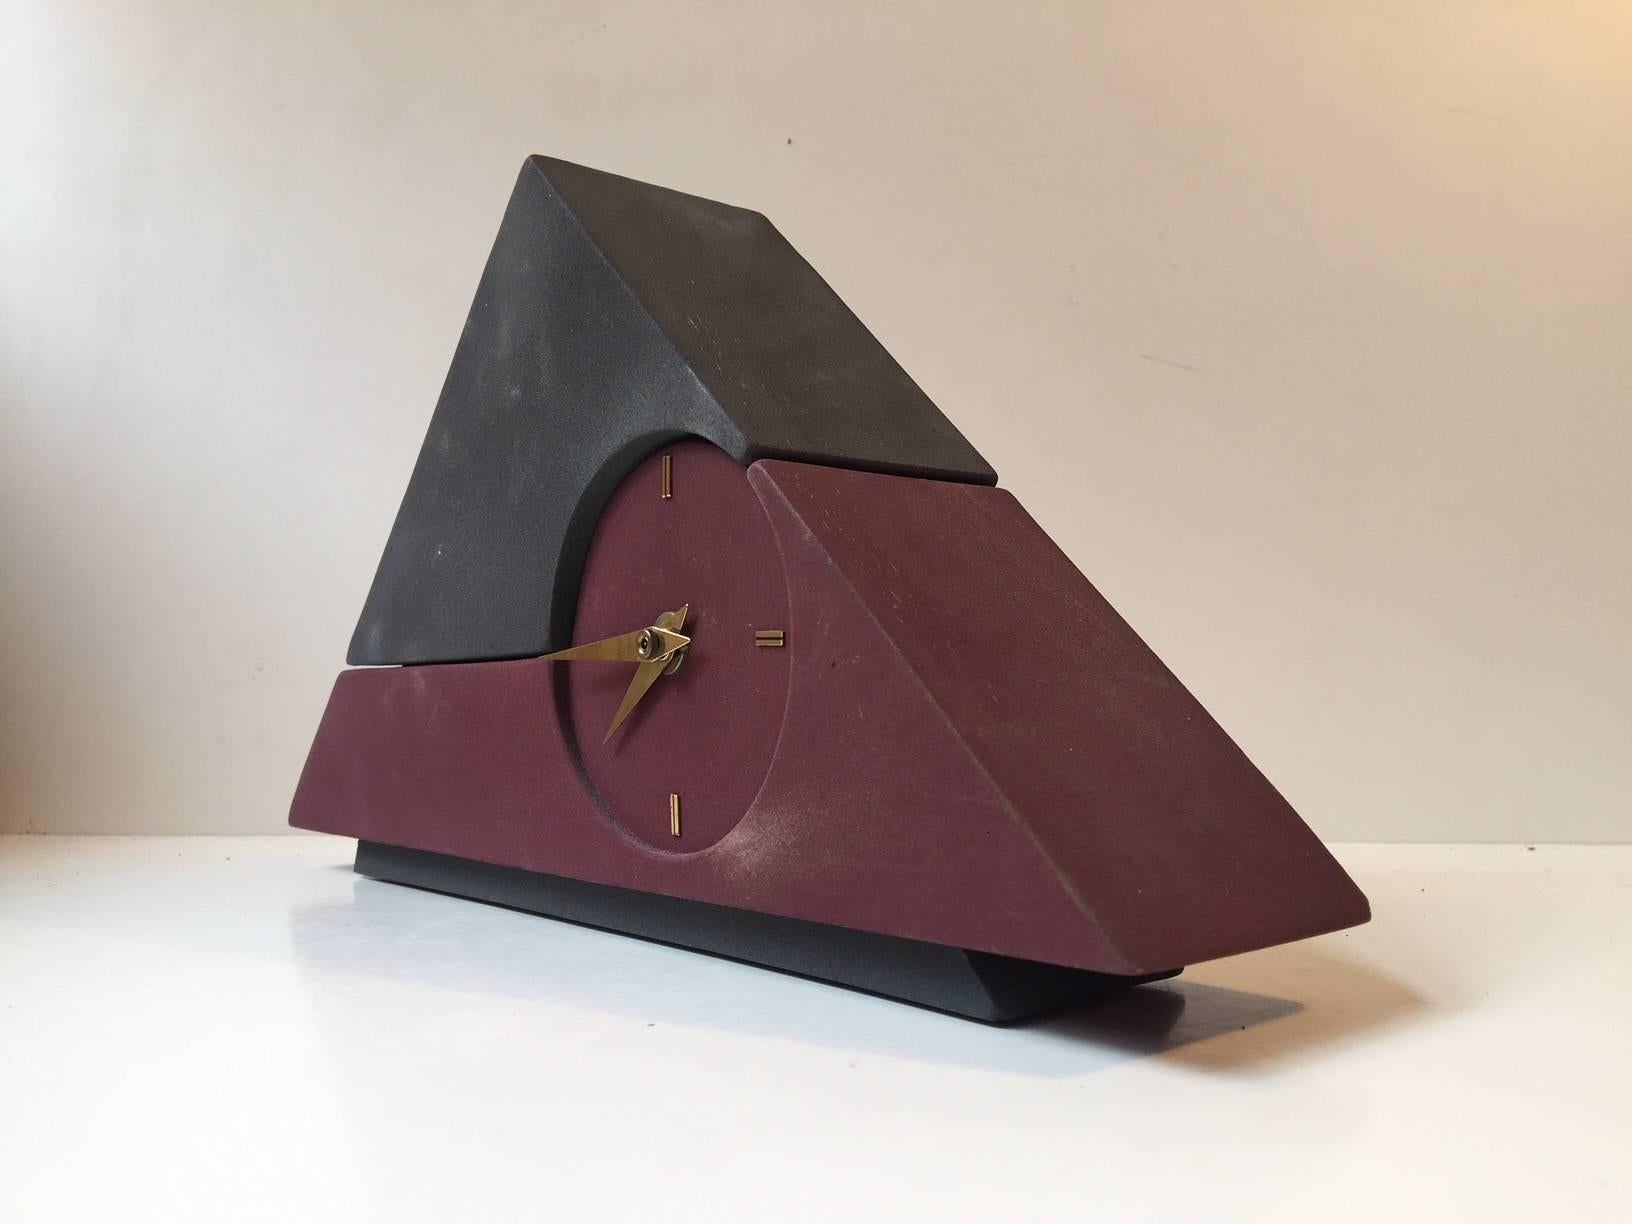 Mid-Century Modern Triangular Modernist Table / Desk Clock by Junghans, Germany, 1970s